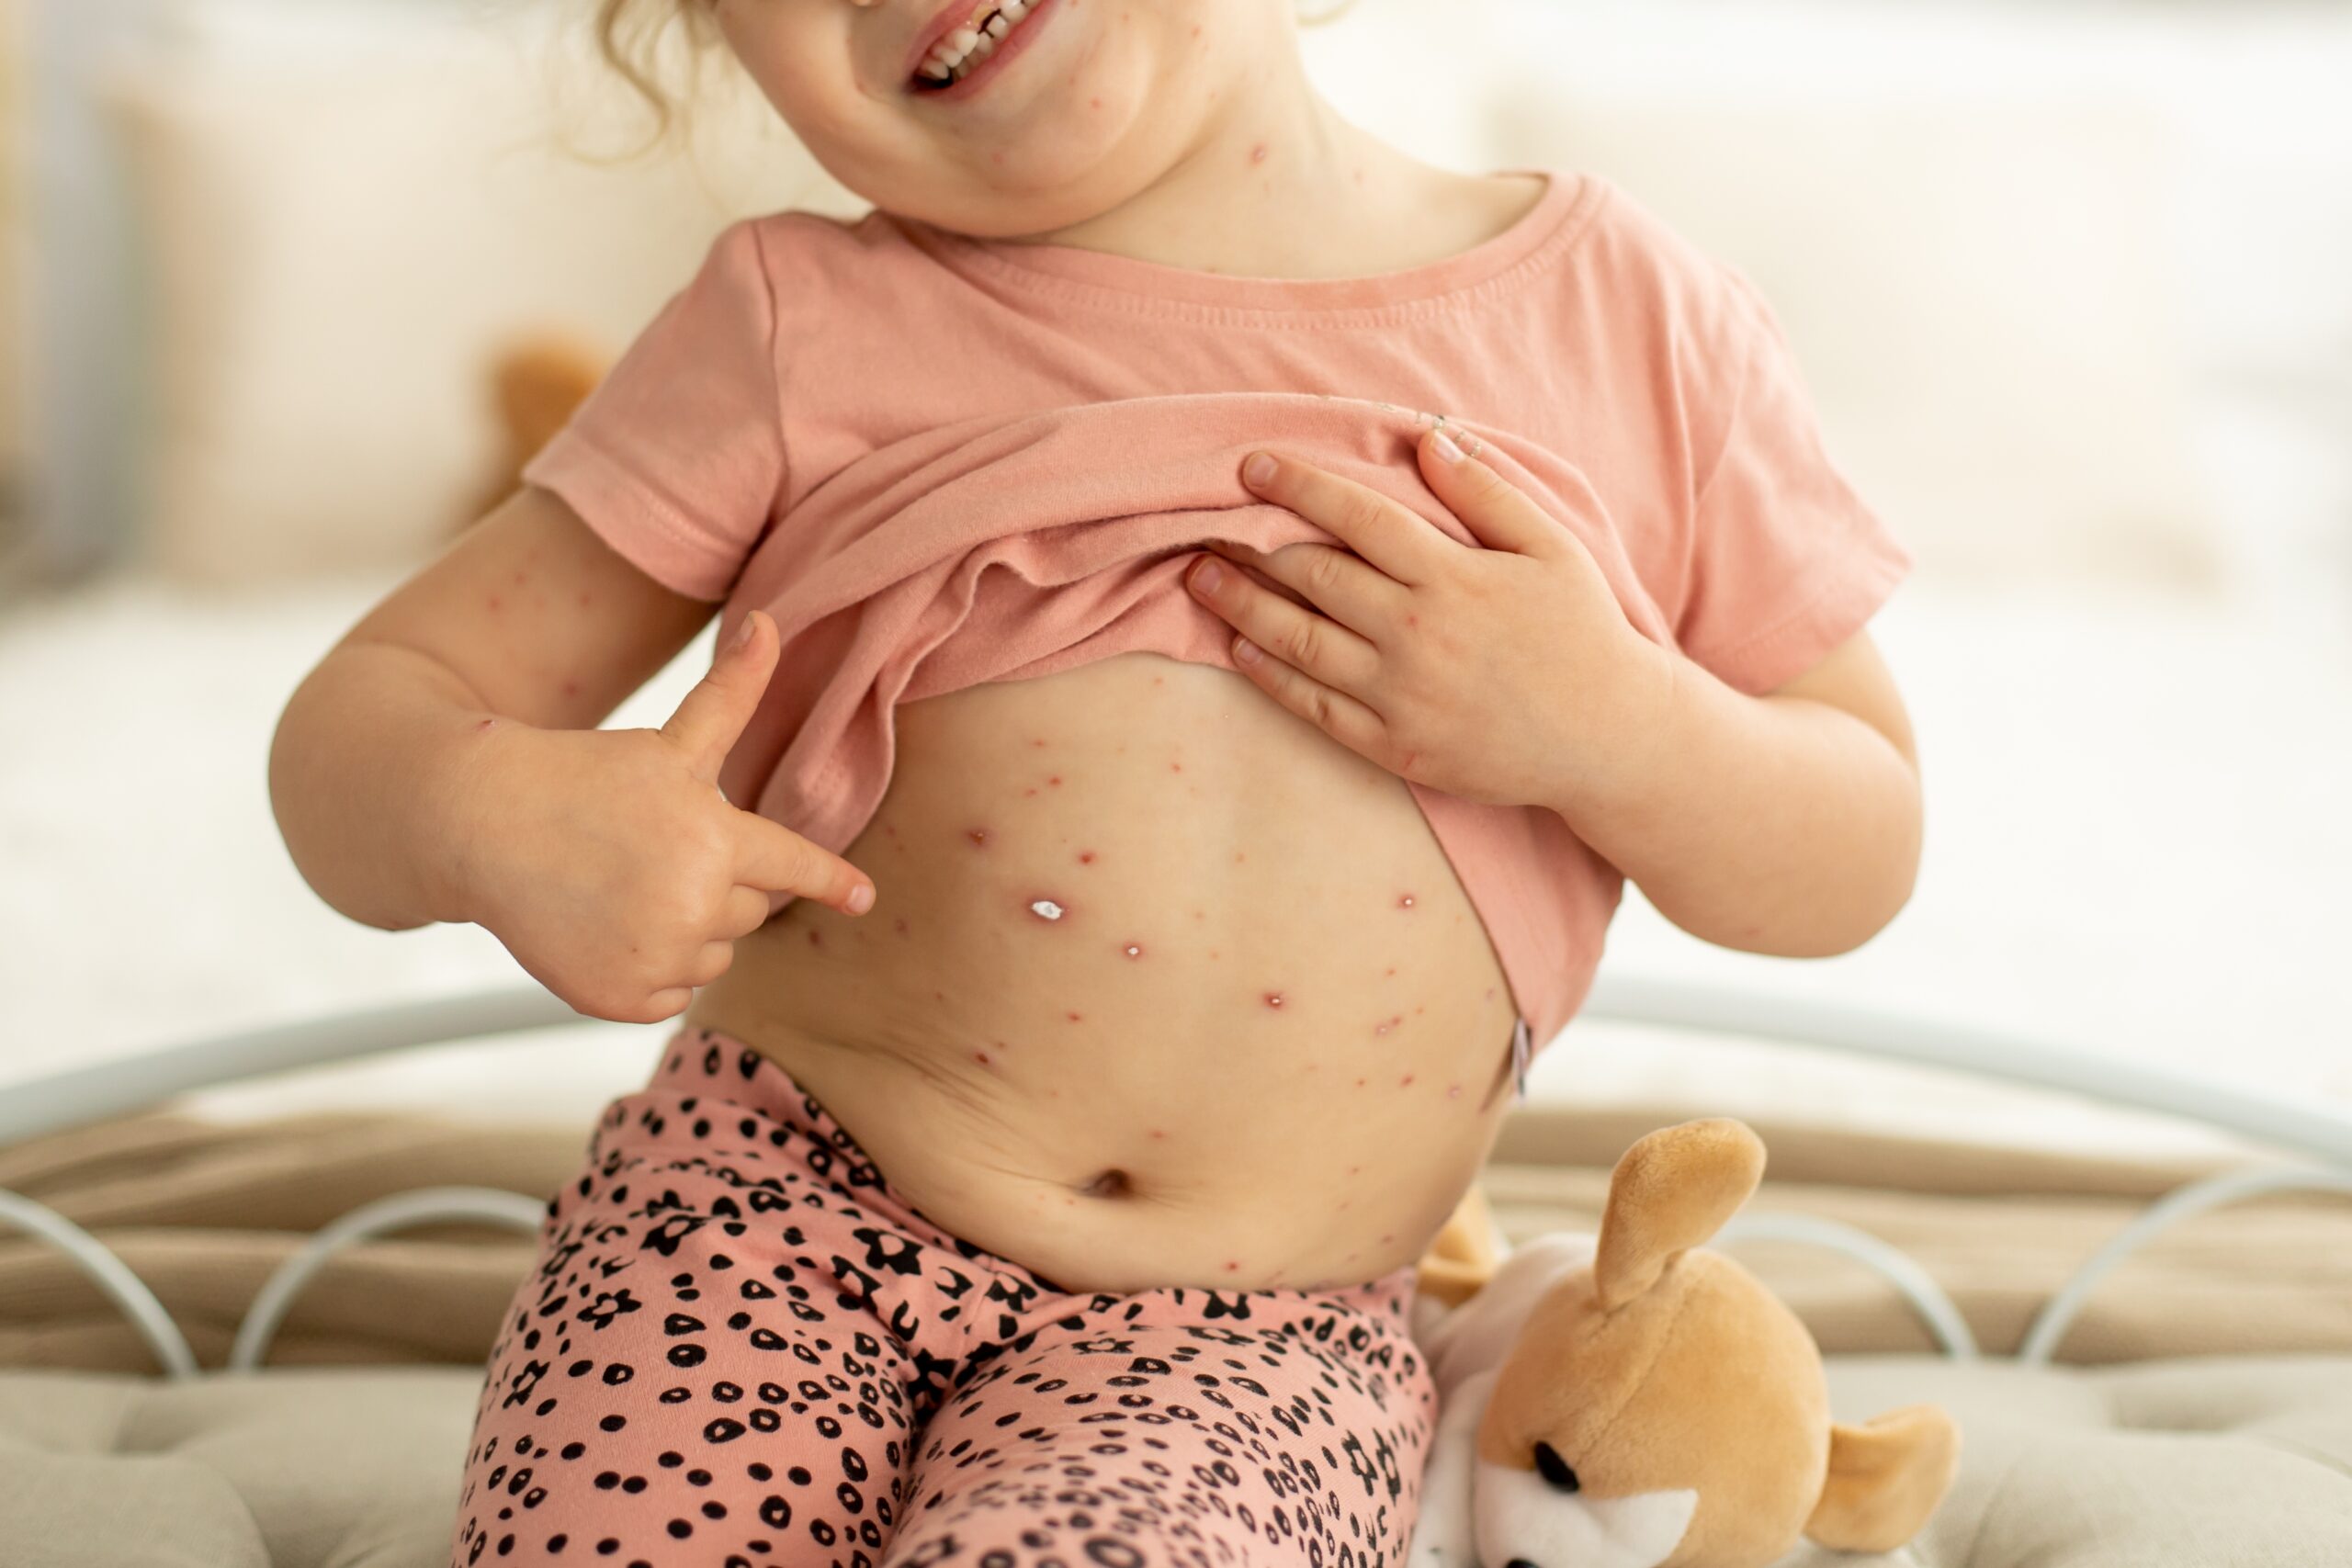 What Is Chickenpox?: Learn More